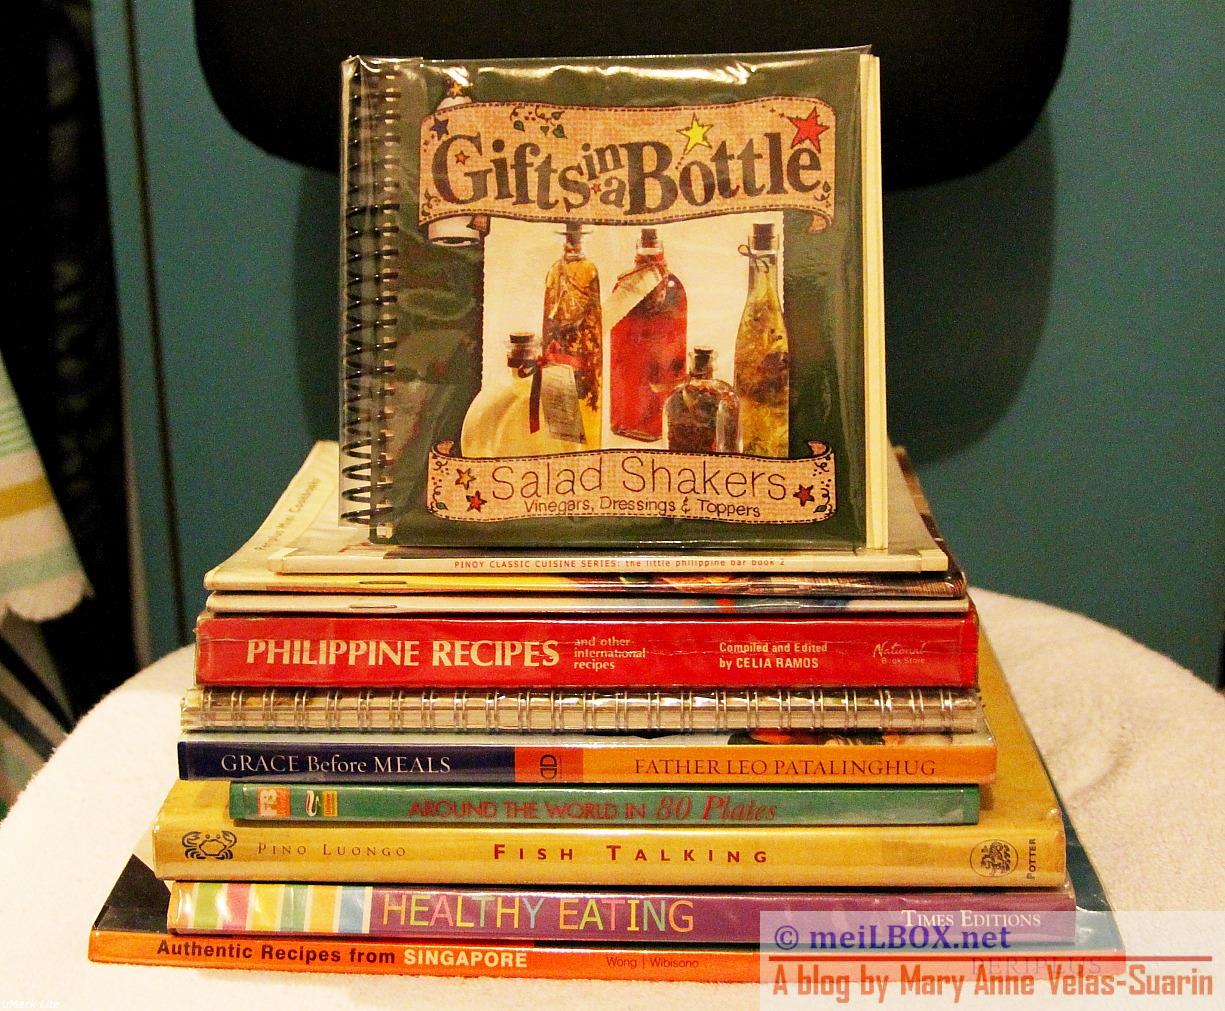 These are JR's favorite books! (Photo taken by Mary Anne Velas-Suarin)